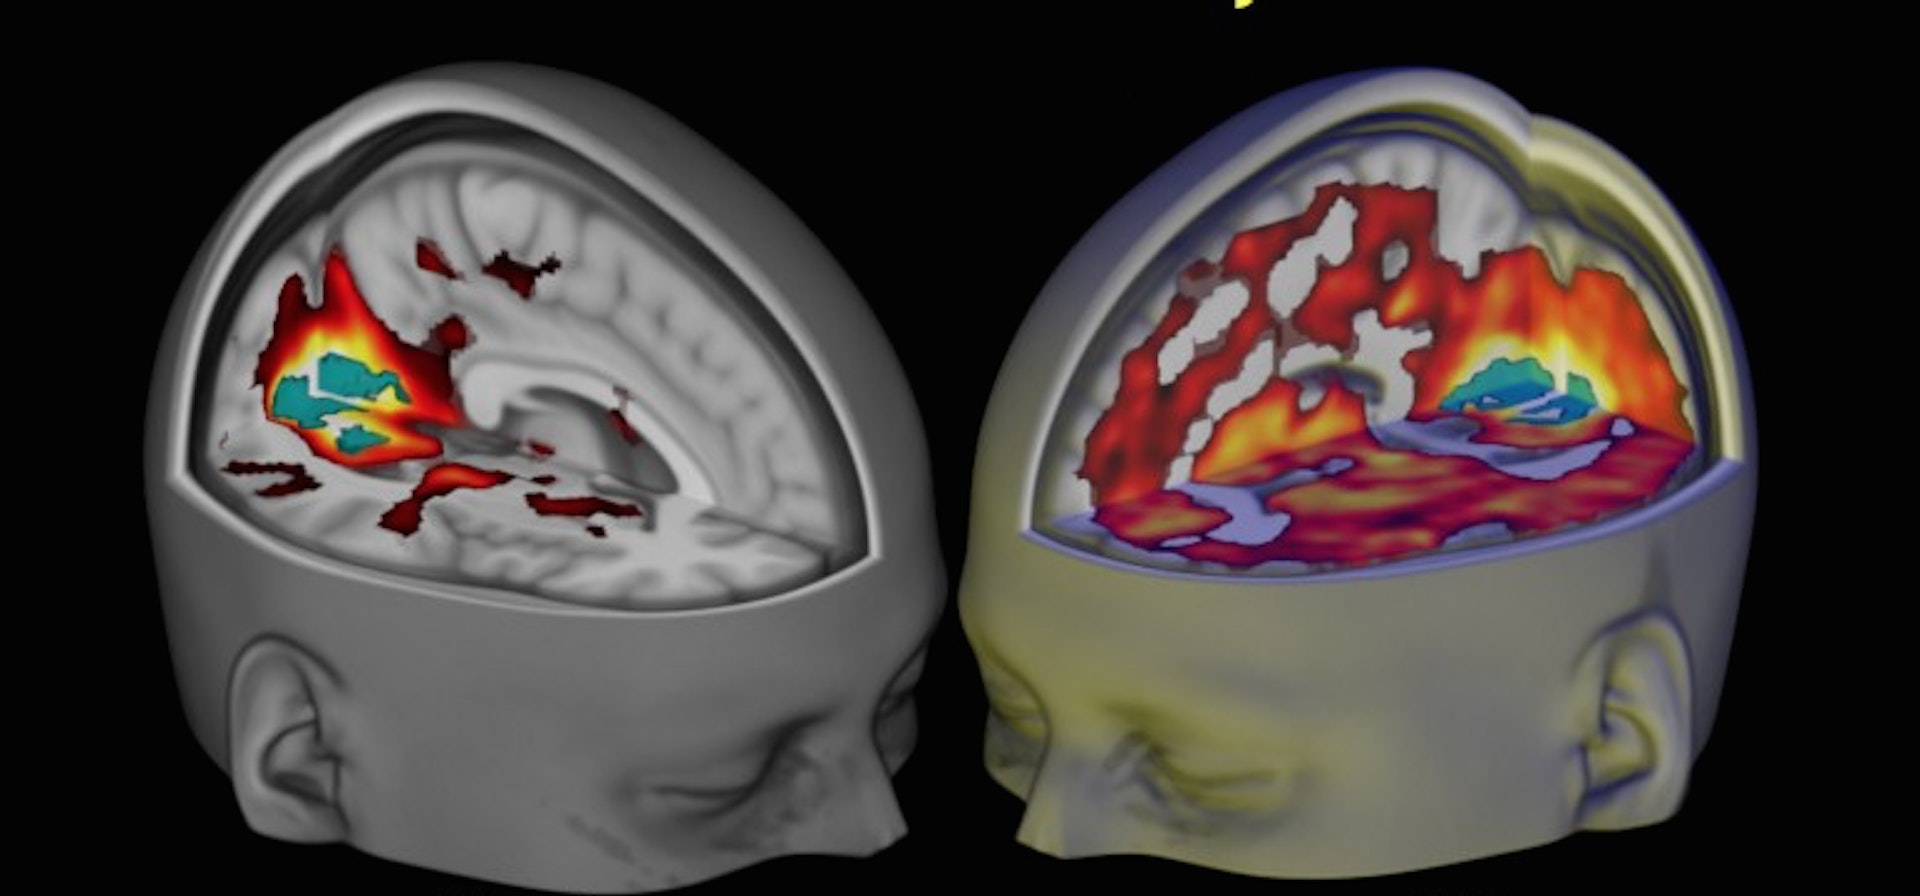 Scientists reveal world’s first images of the human brain on LSD